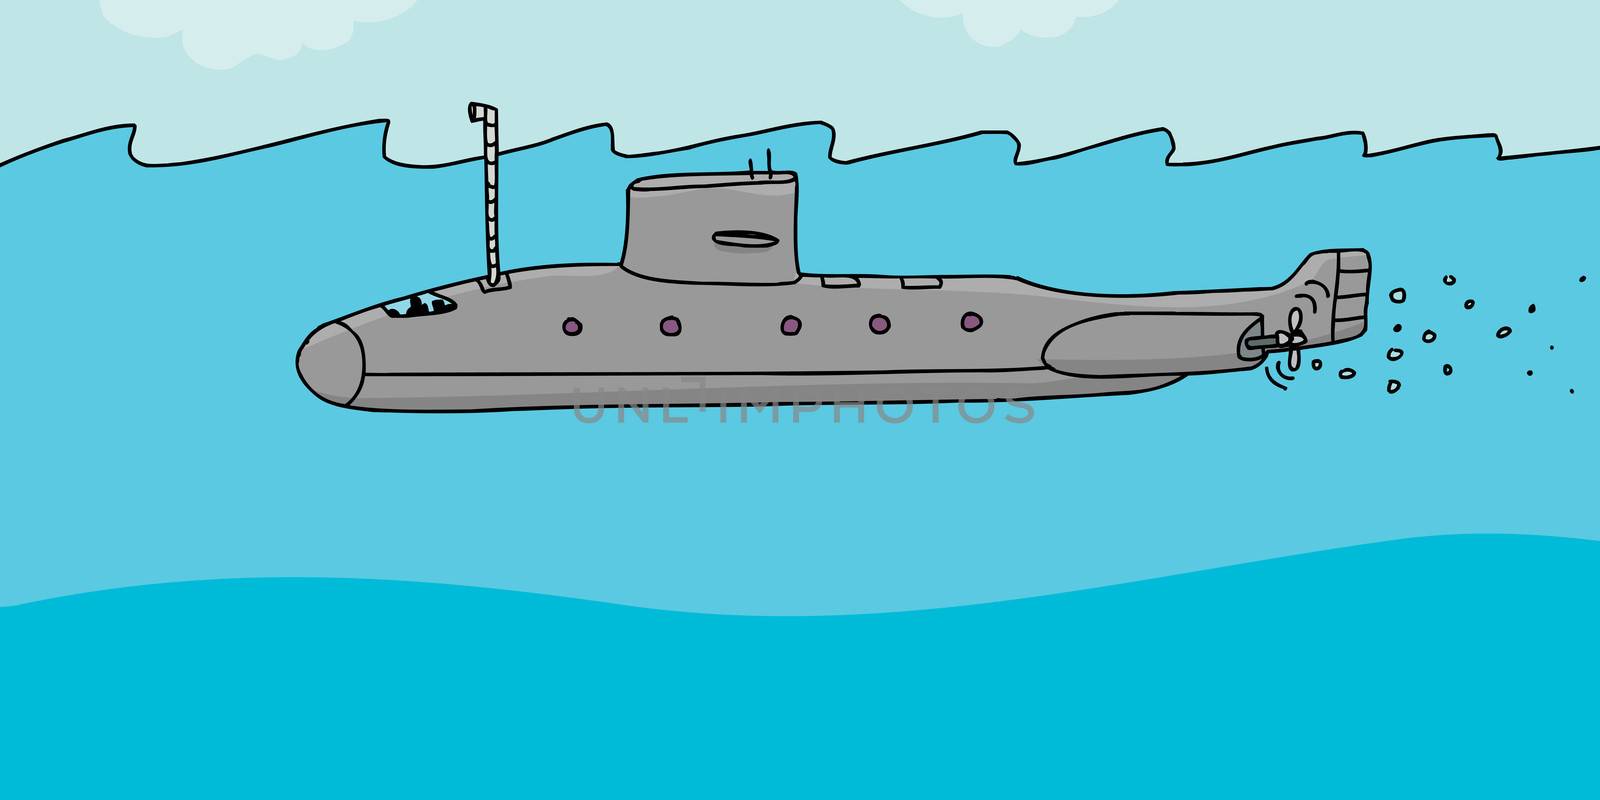 Cartoon submarine with periscope above the water